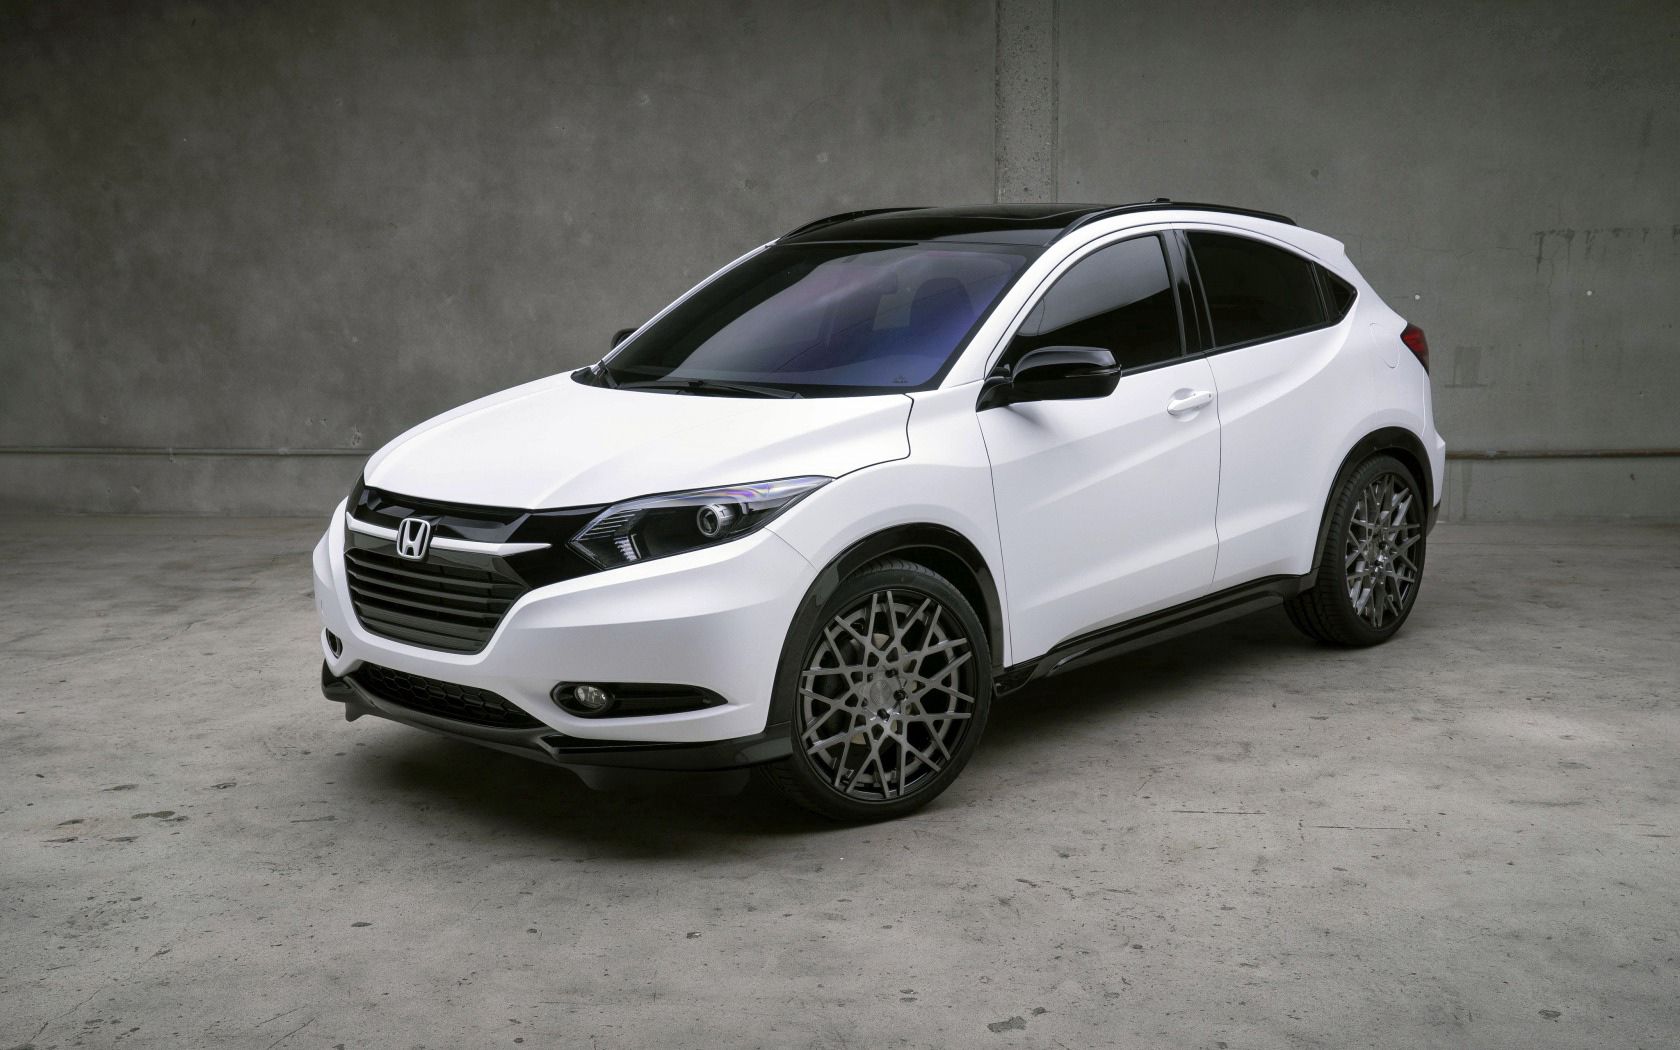 148264 Screensavers and Wallpapers Honda for phone. Download honda, cars, white, side view, hr-v pictures for free